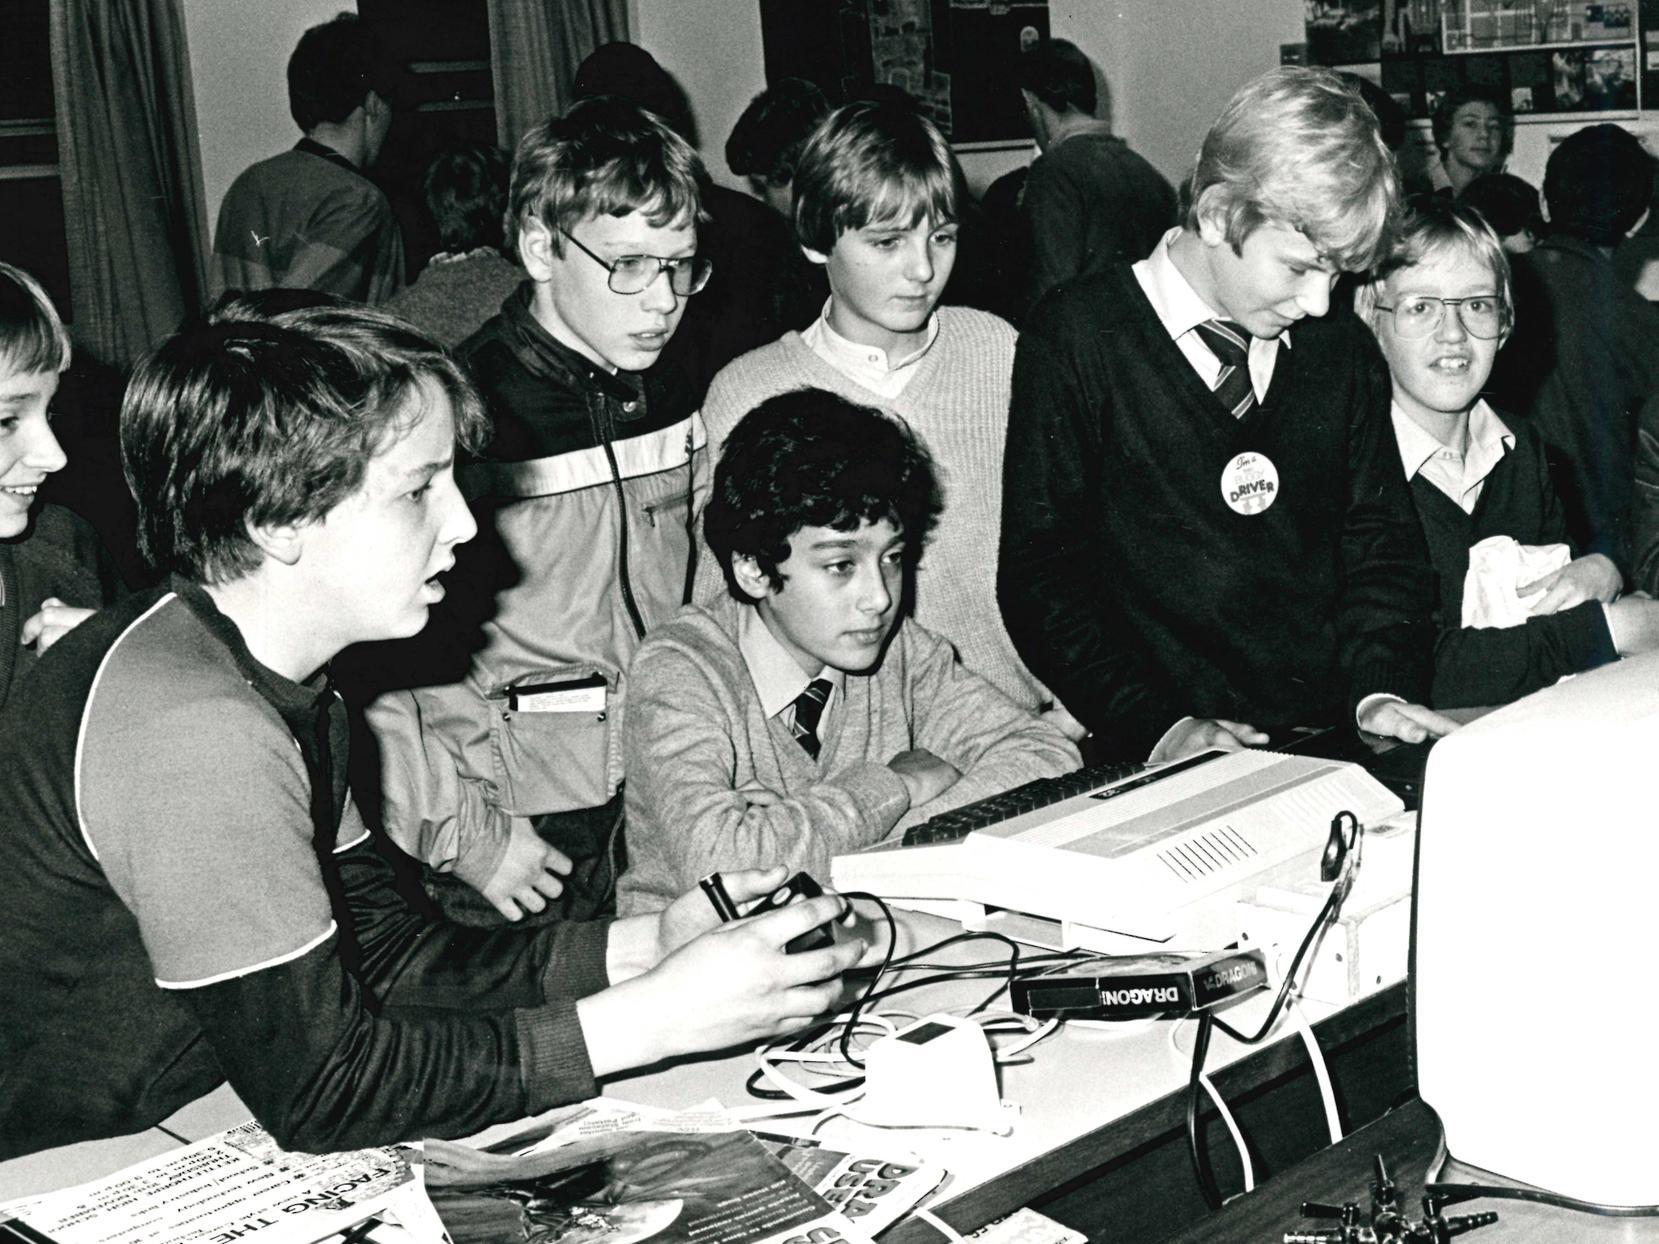 Kettlethorpe High school holds a careers convention and technology exhibition, 1983.